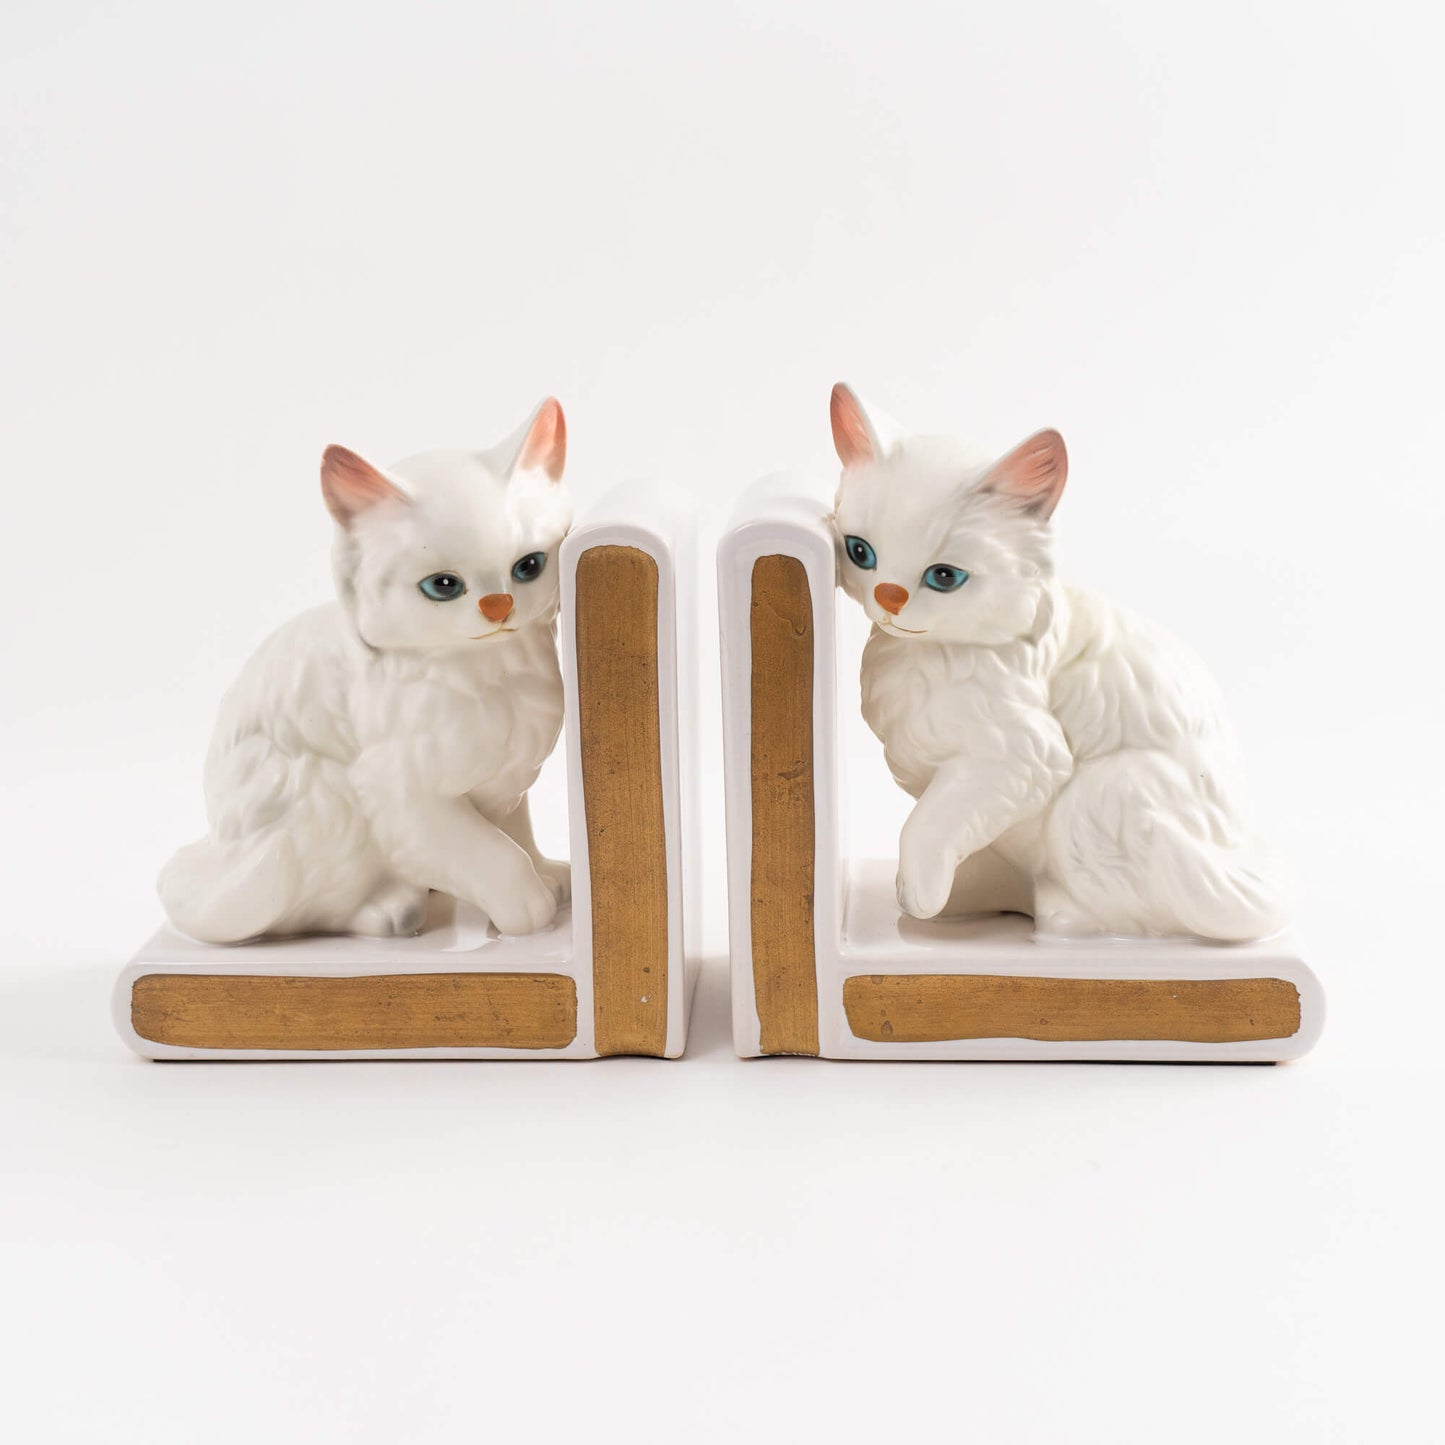 Vintage White Kitten Ceramic Bookends - A Pair